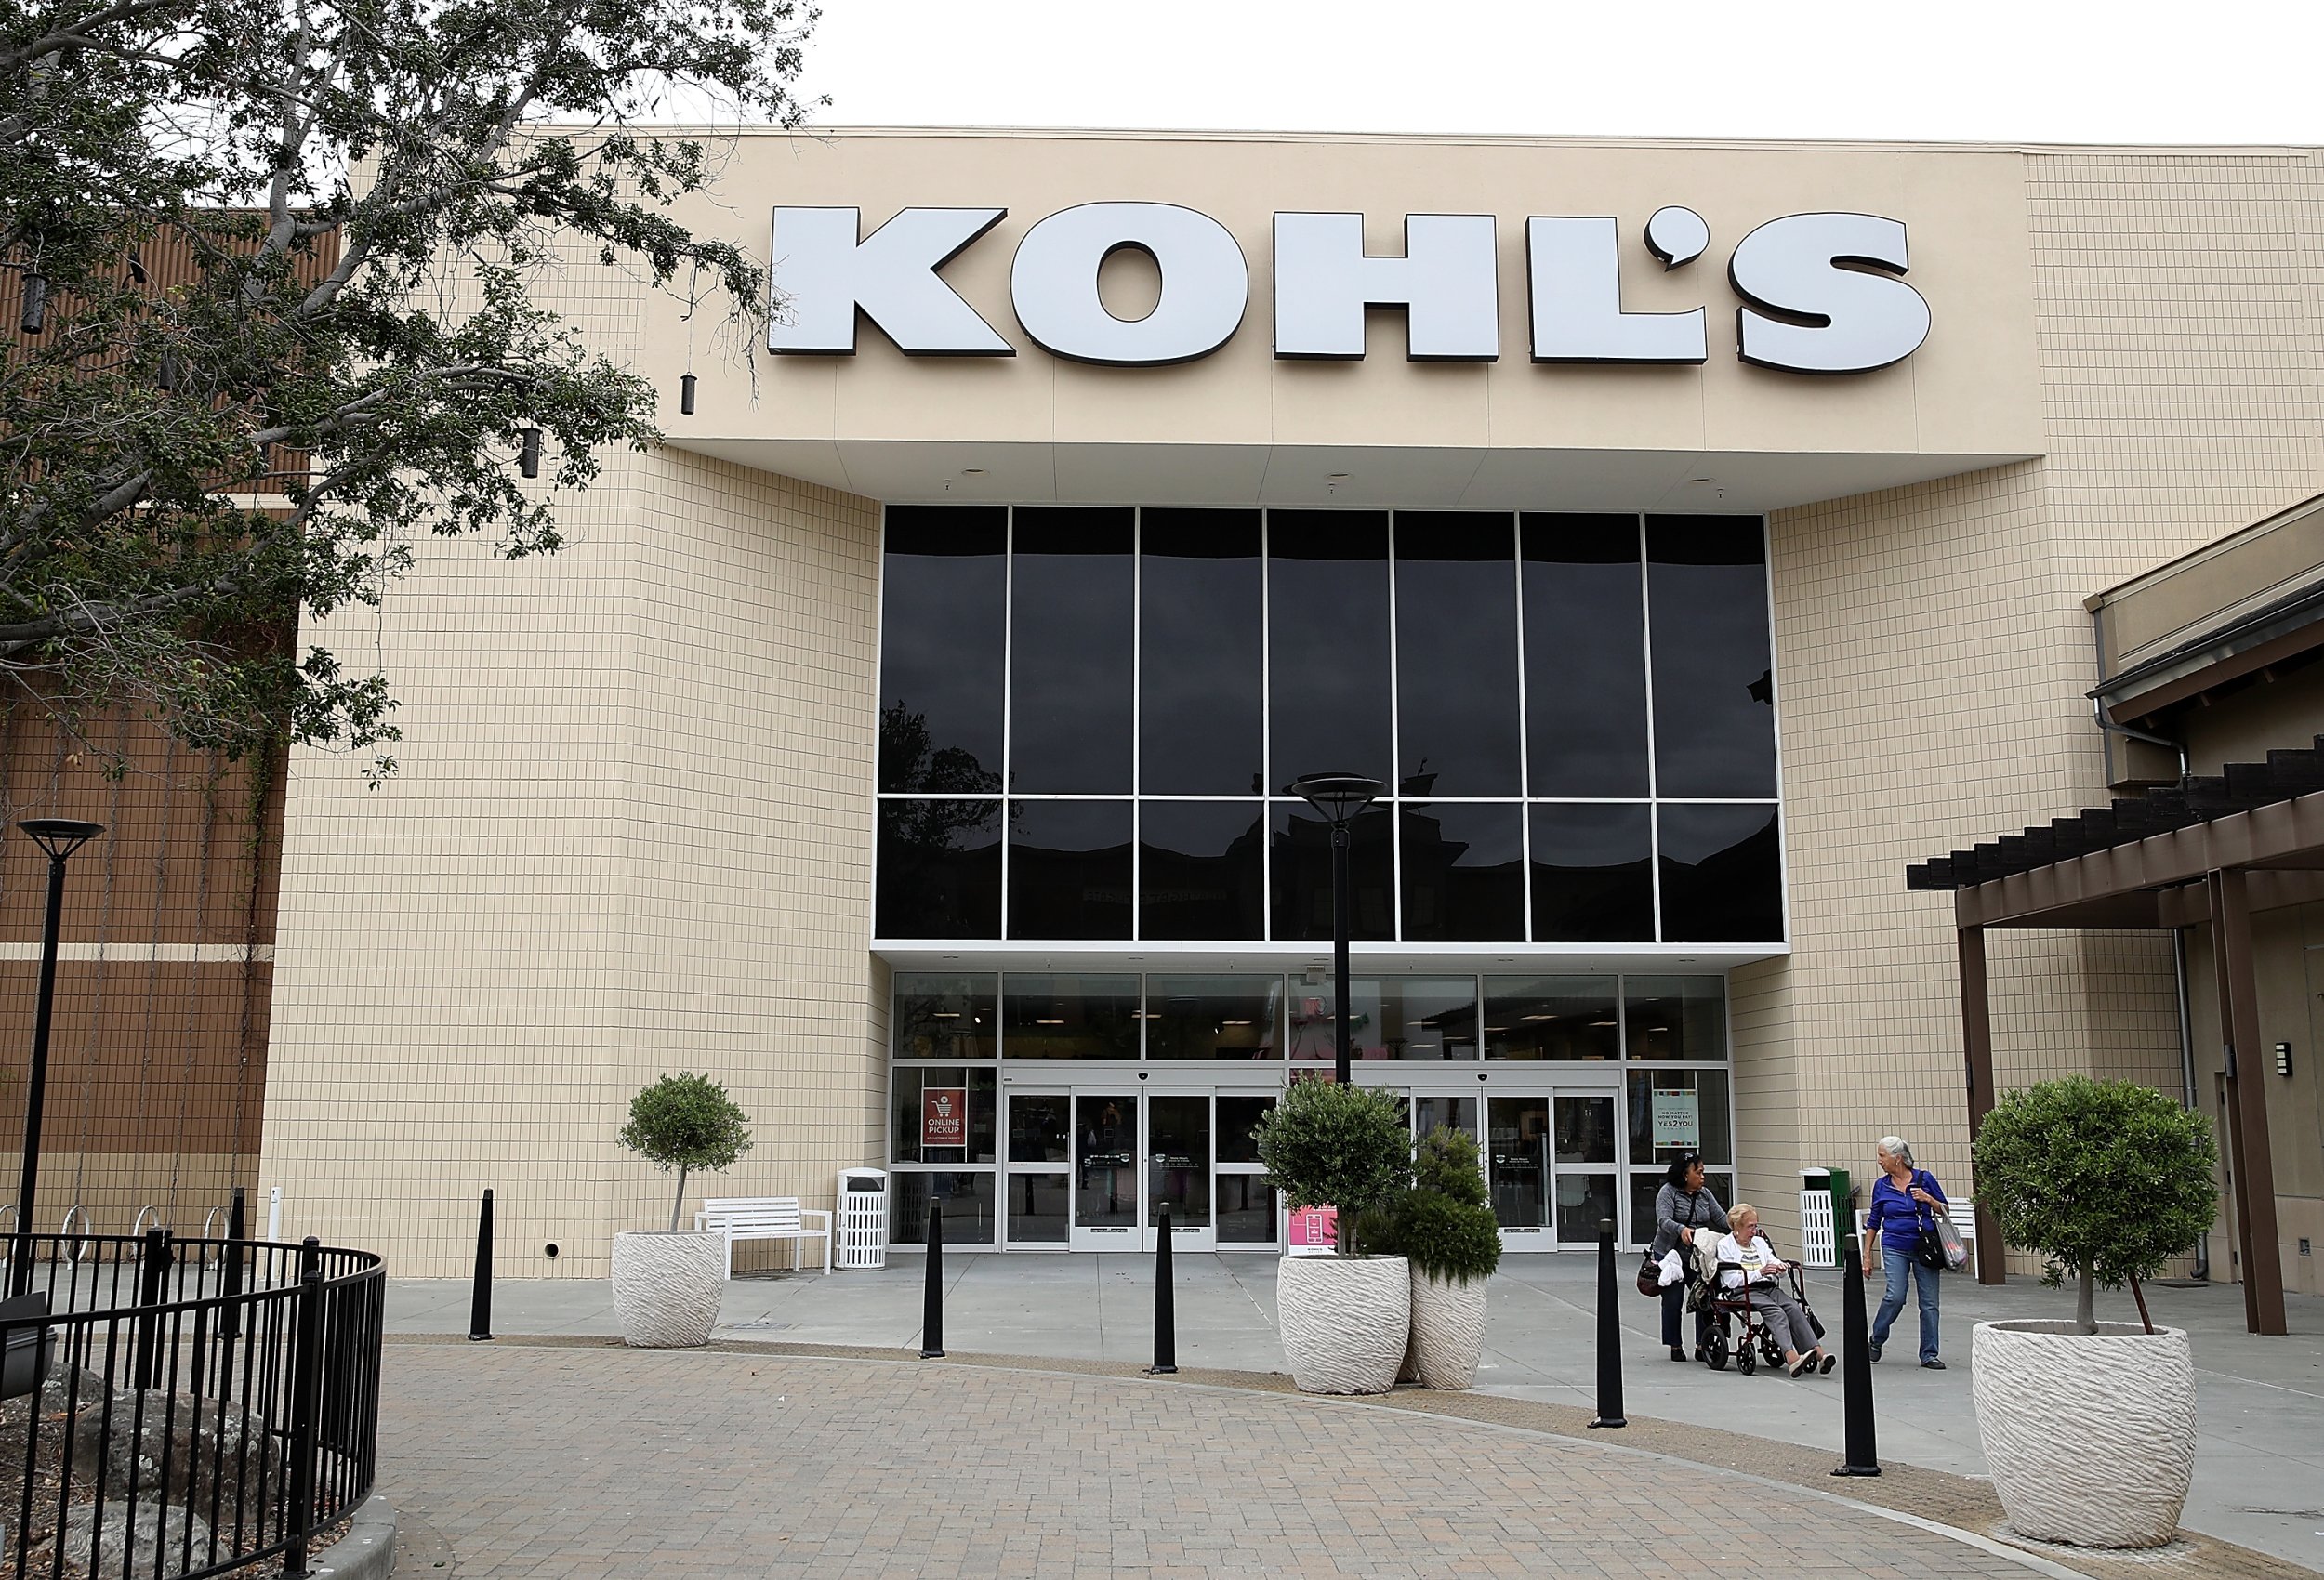 Is A Kohl's Sephora Shop Opening Near You In 2022? [Complete List